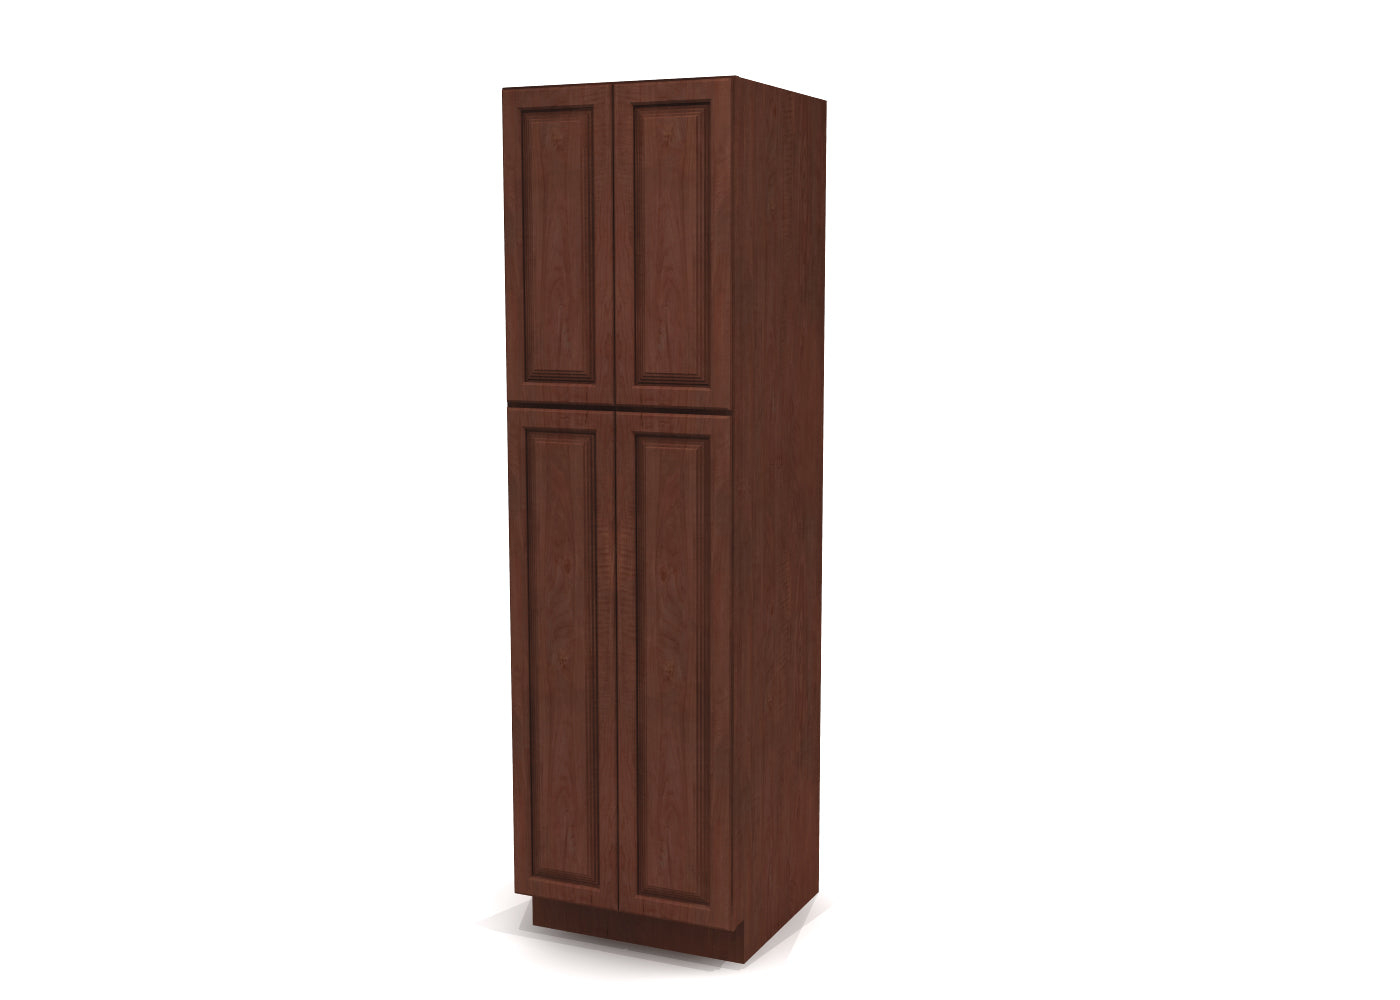 Utility Pantry Double Door 84" by 24" Wide Cherry Raised Panel Cabinet